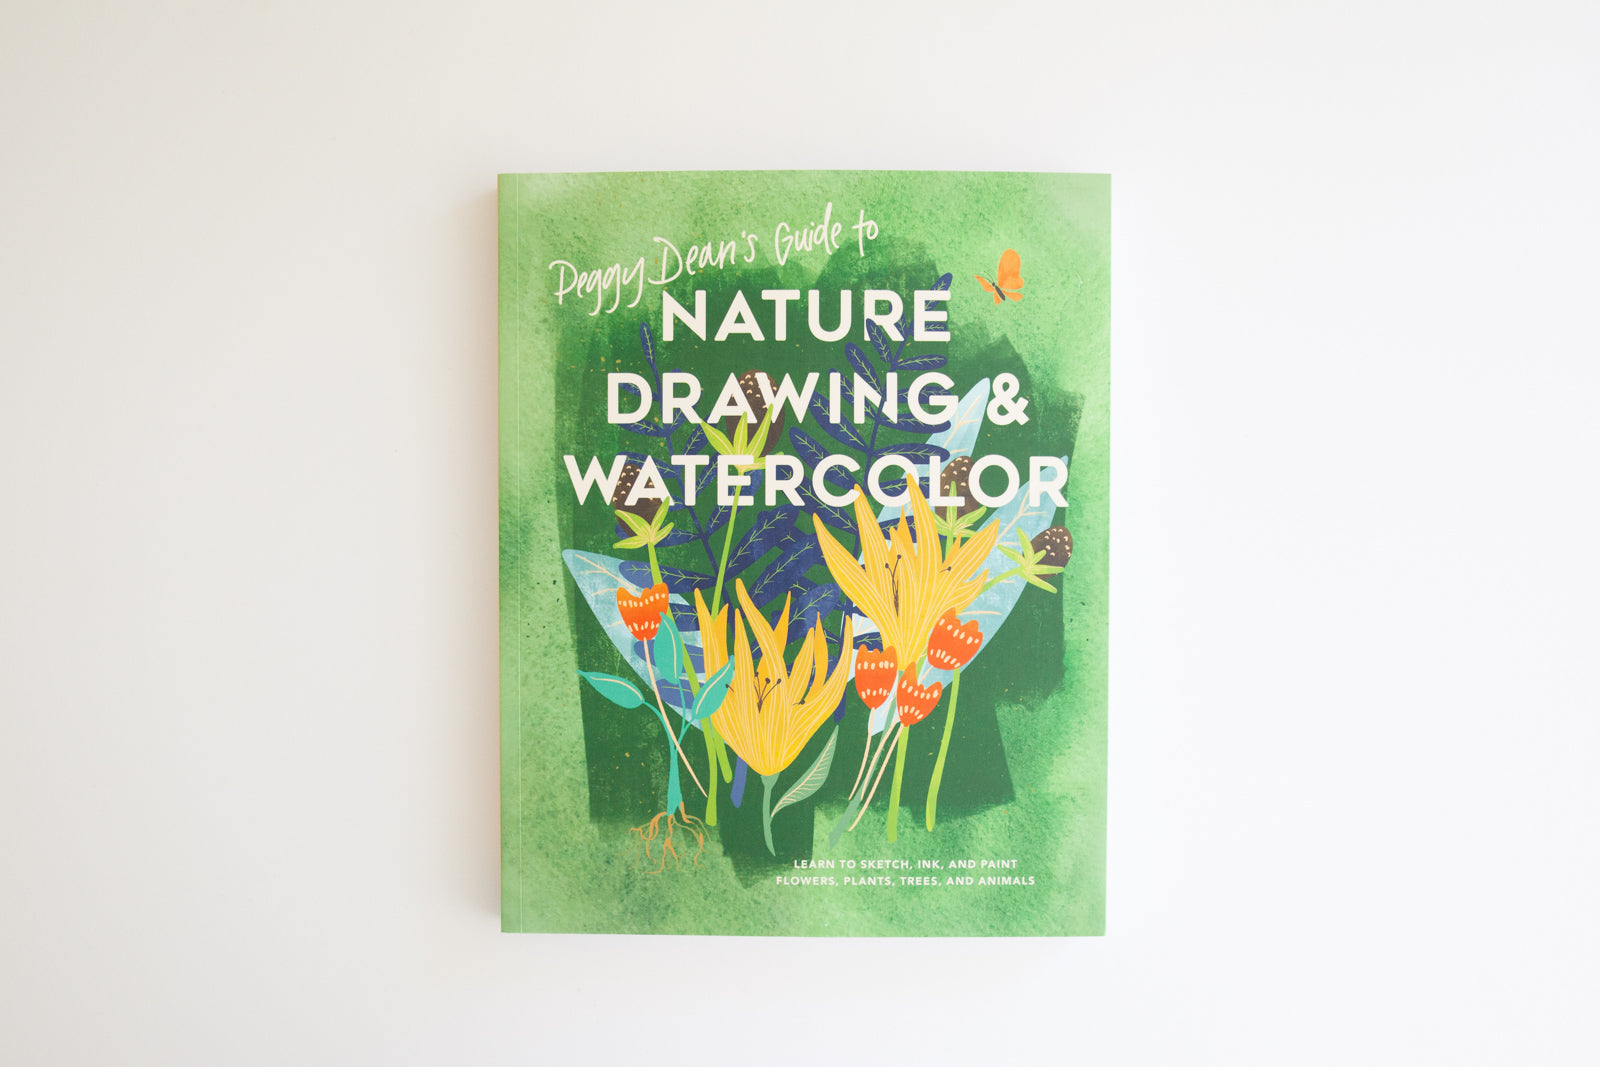 'Peggy Deans Guide to Nature Drawing' by Peggy Deans